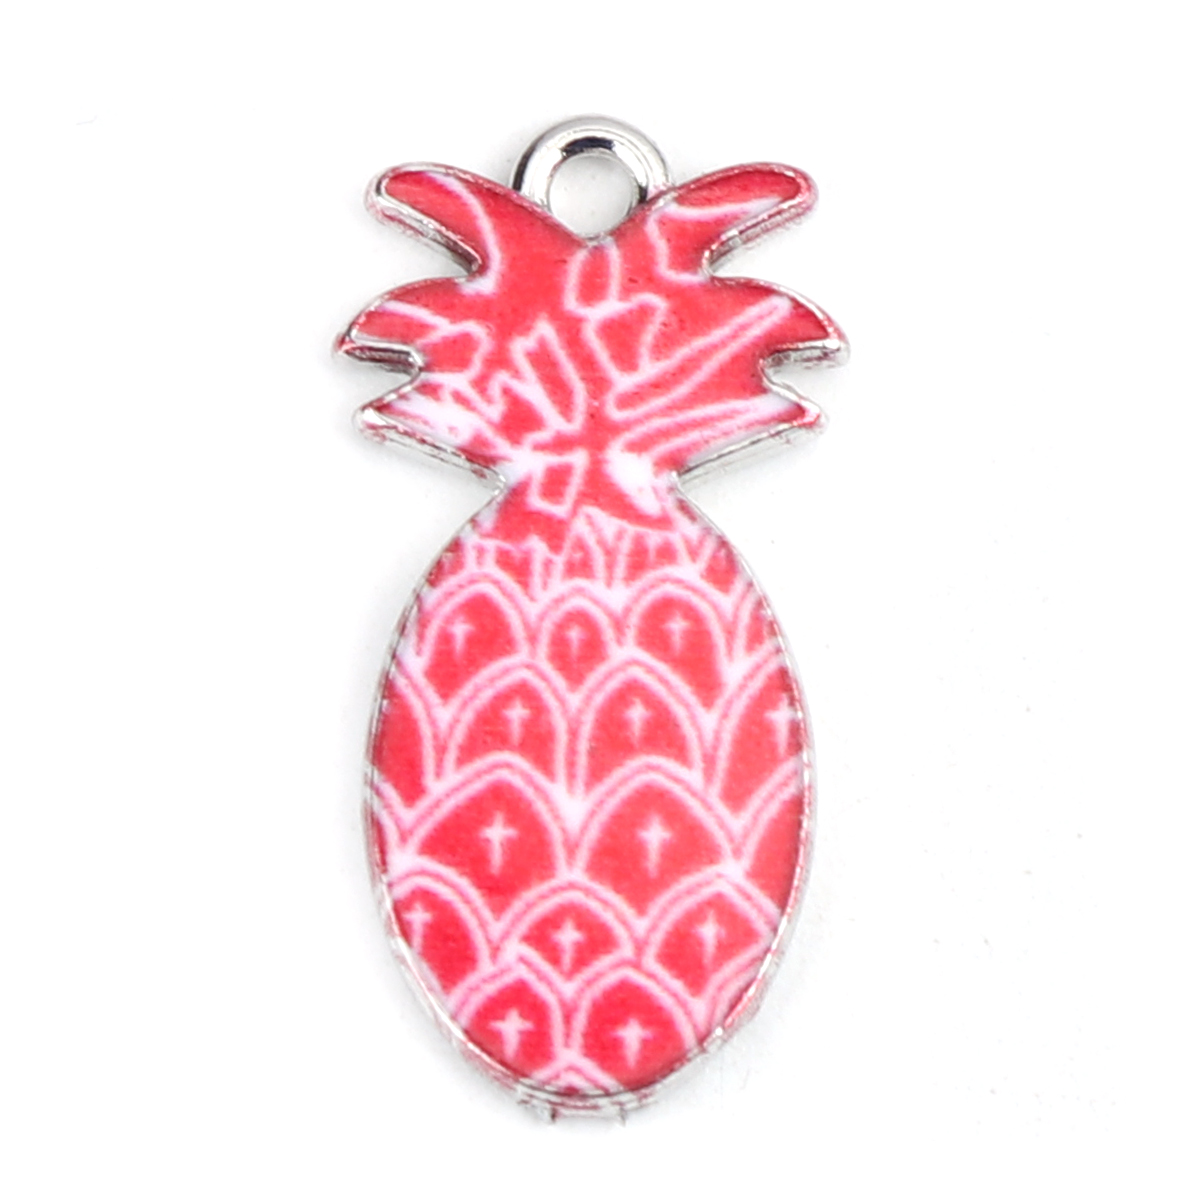 Picture of Zinc Based Alloy Charms Pineapple/ Ananas Fruit Silver Tone White & Red Enamel 24mm x 12mm, 10 PCs